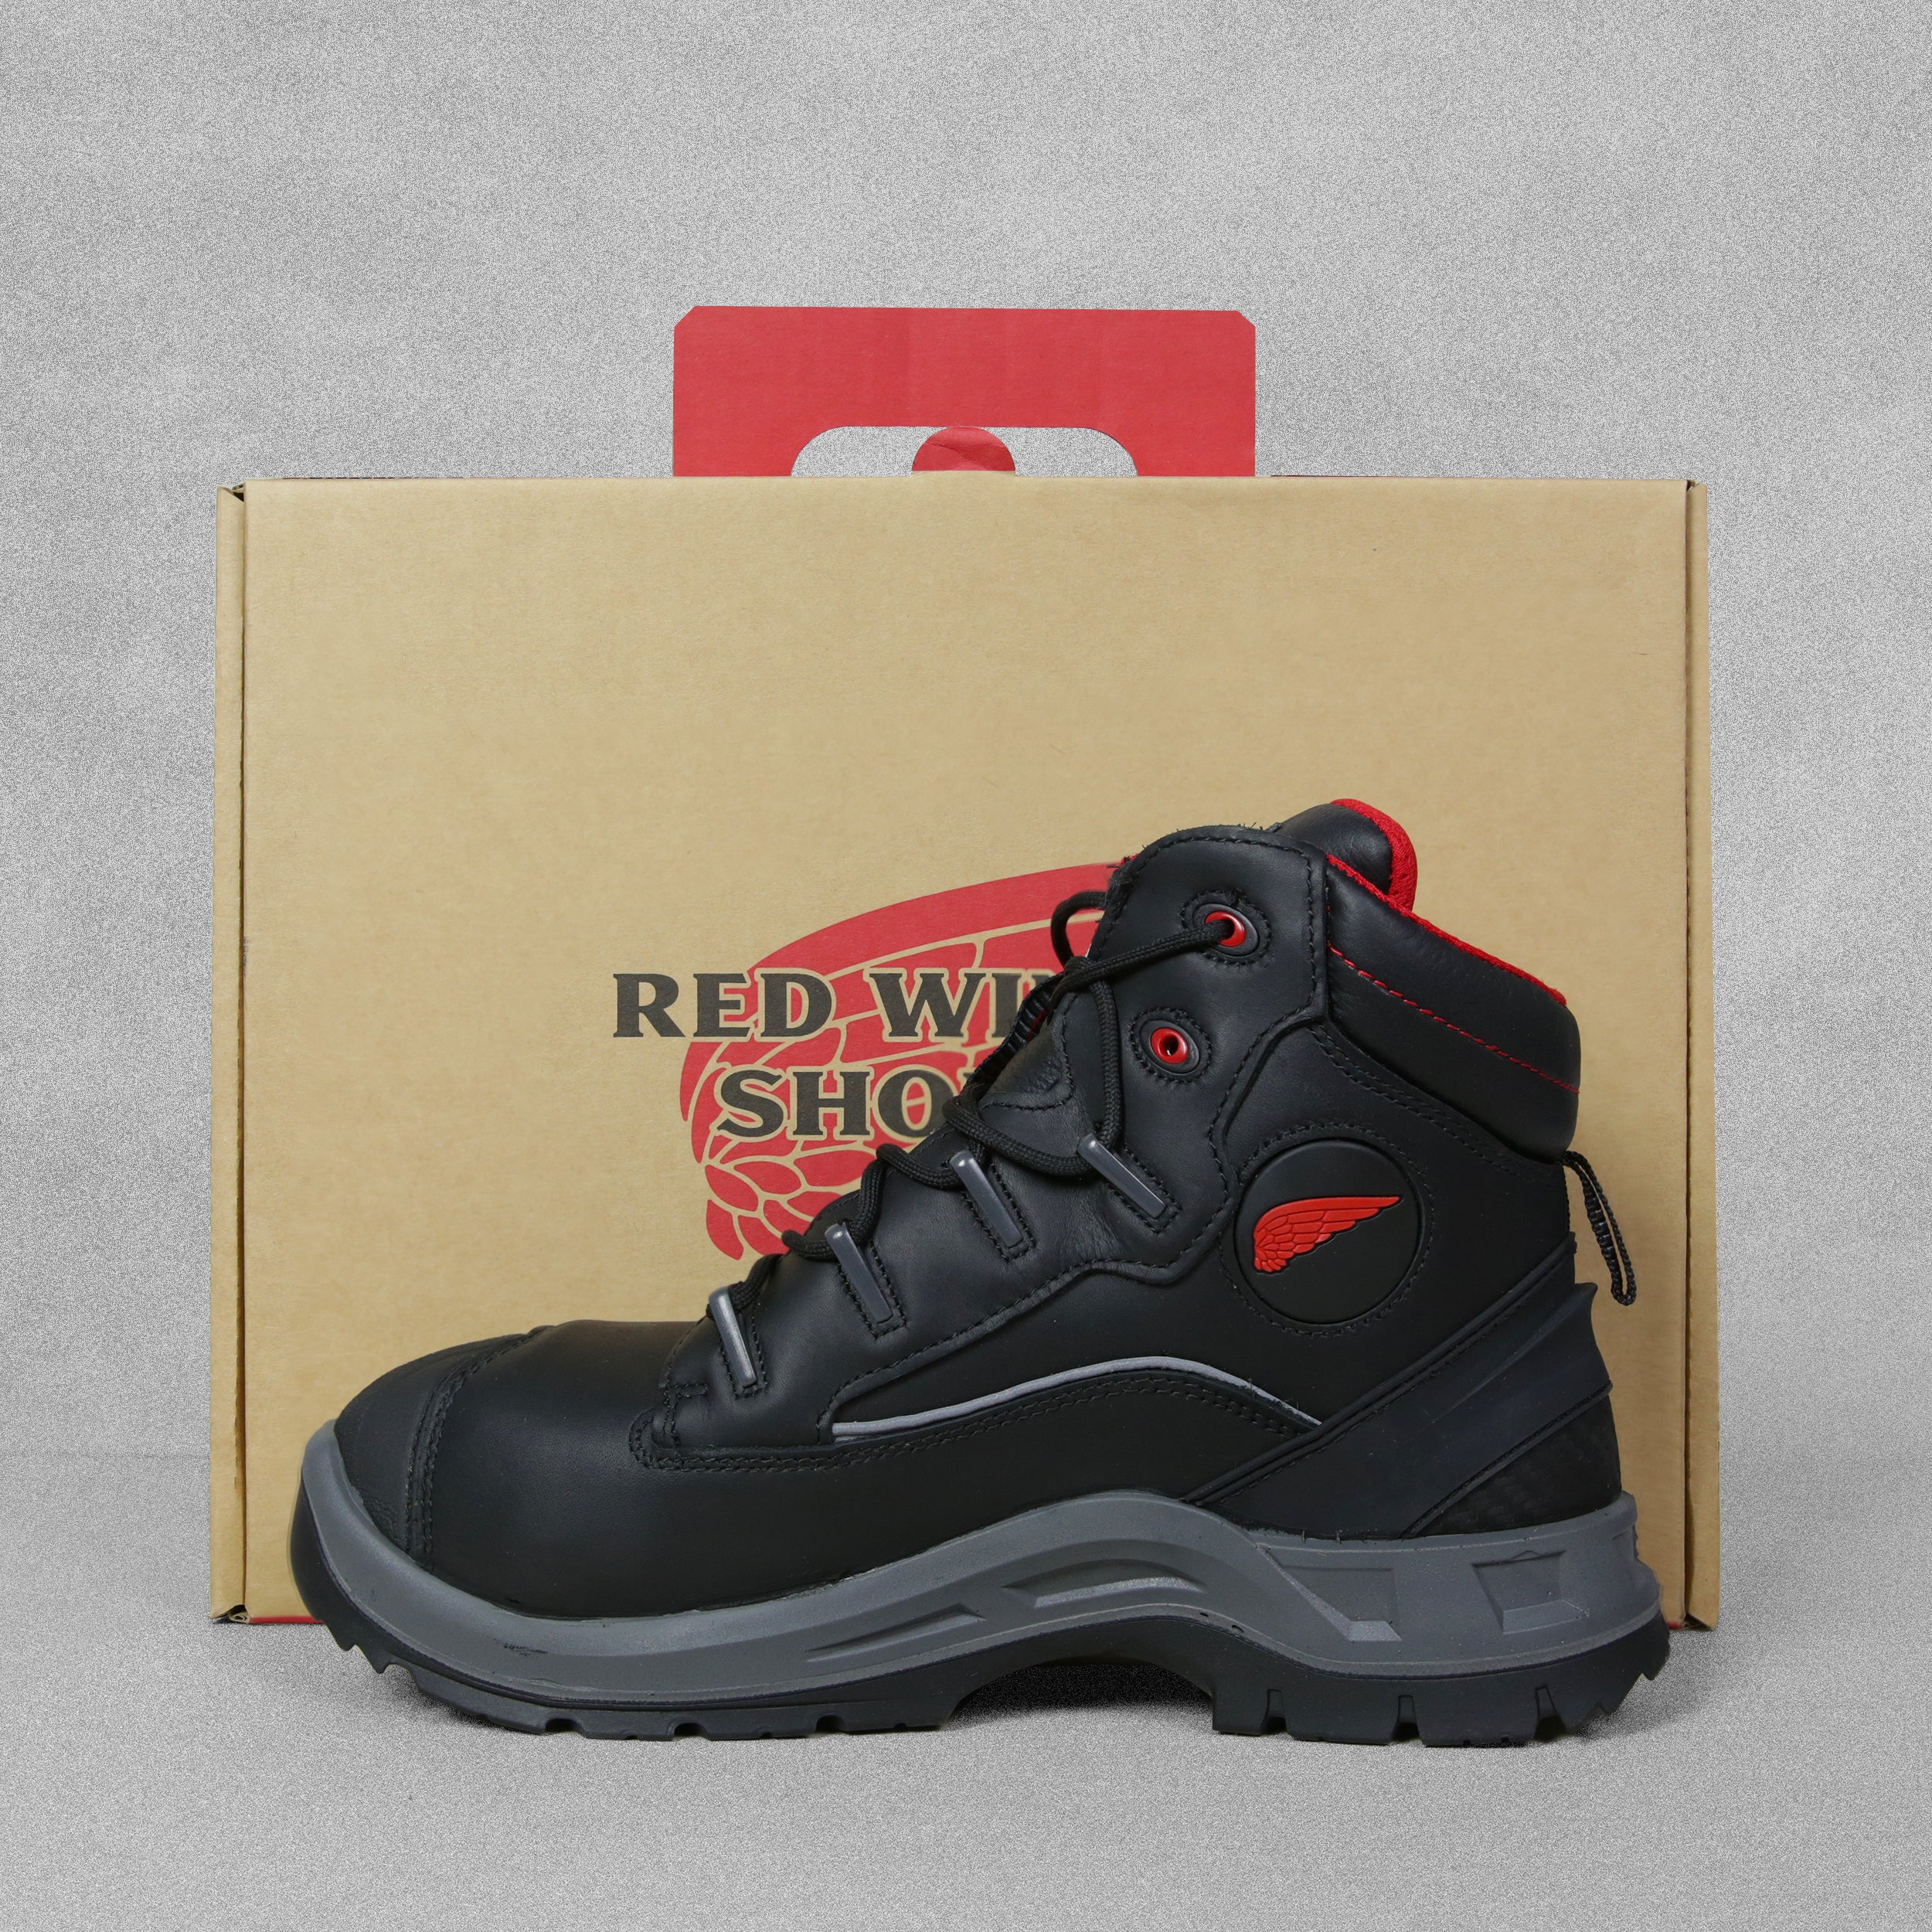 Red Wing 3203 Safety Boots